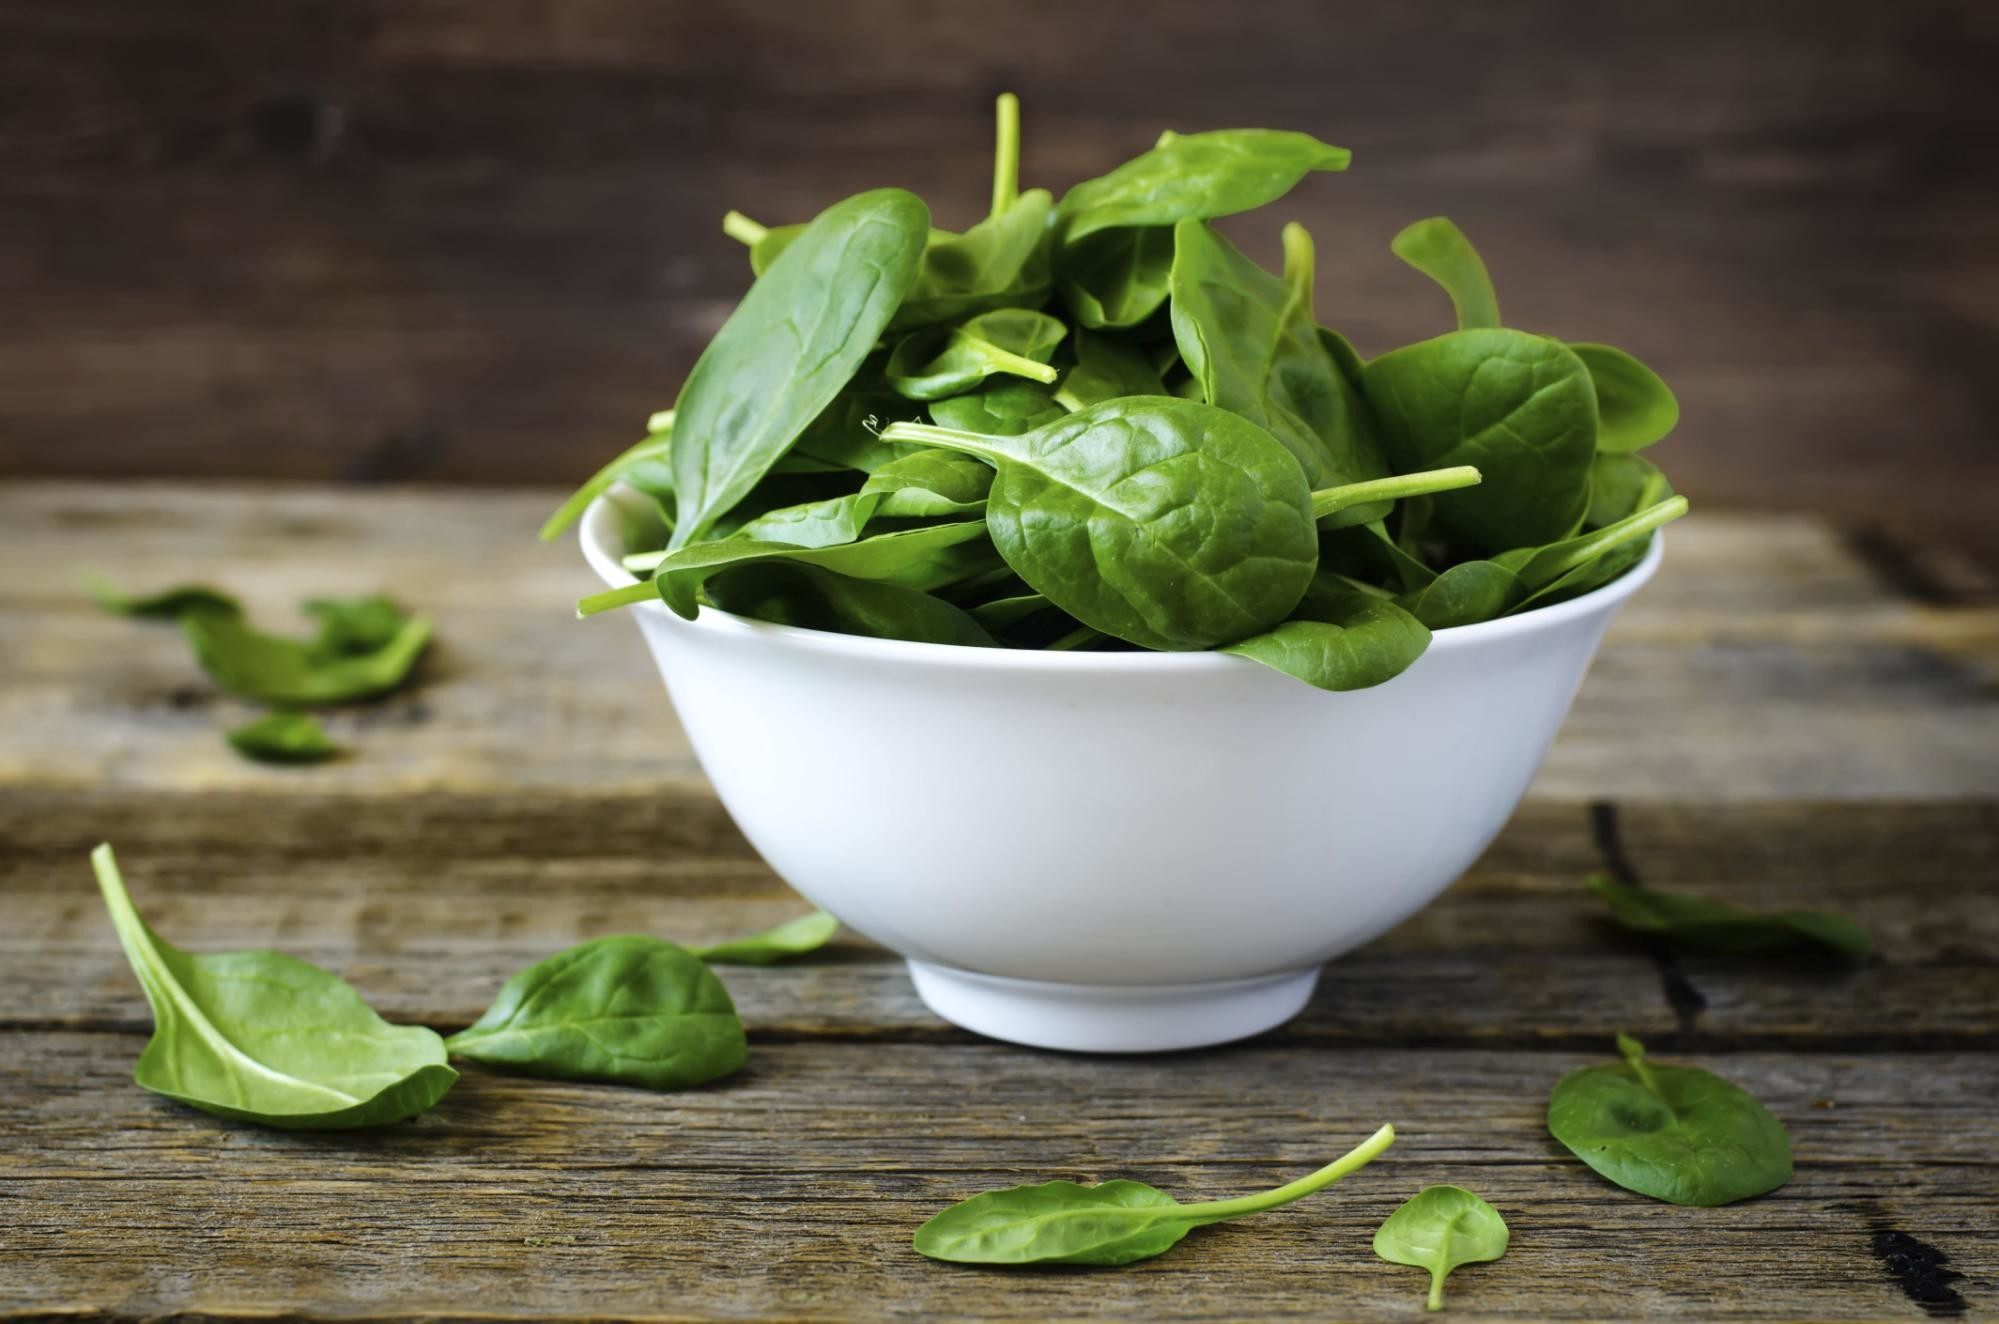 Organic Spinach: An Iron-Packed Superfood for Your Daily Diet